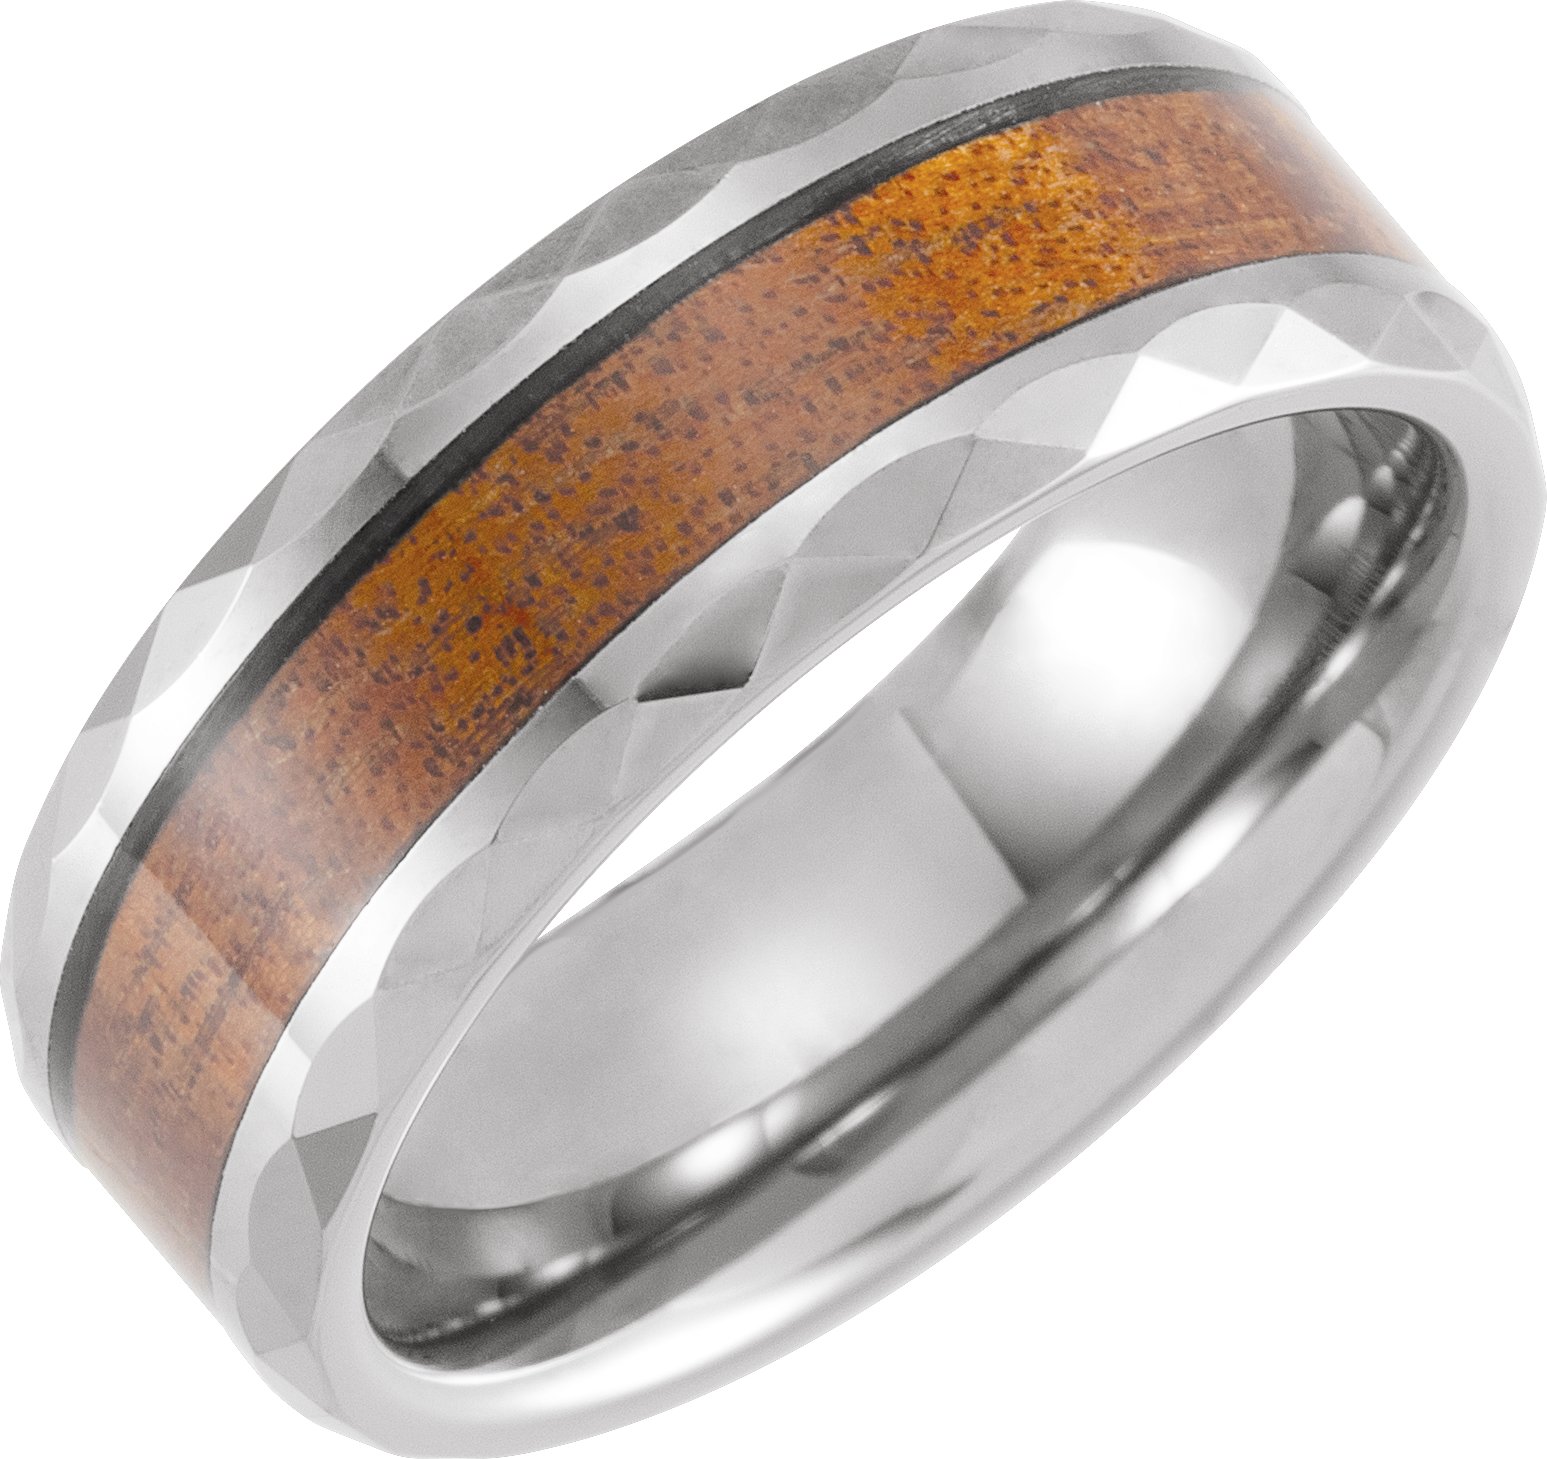 Tungsten 8 mm Beveled Band with Acacia Wood Inlay Size 14